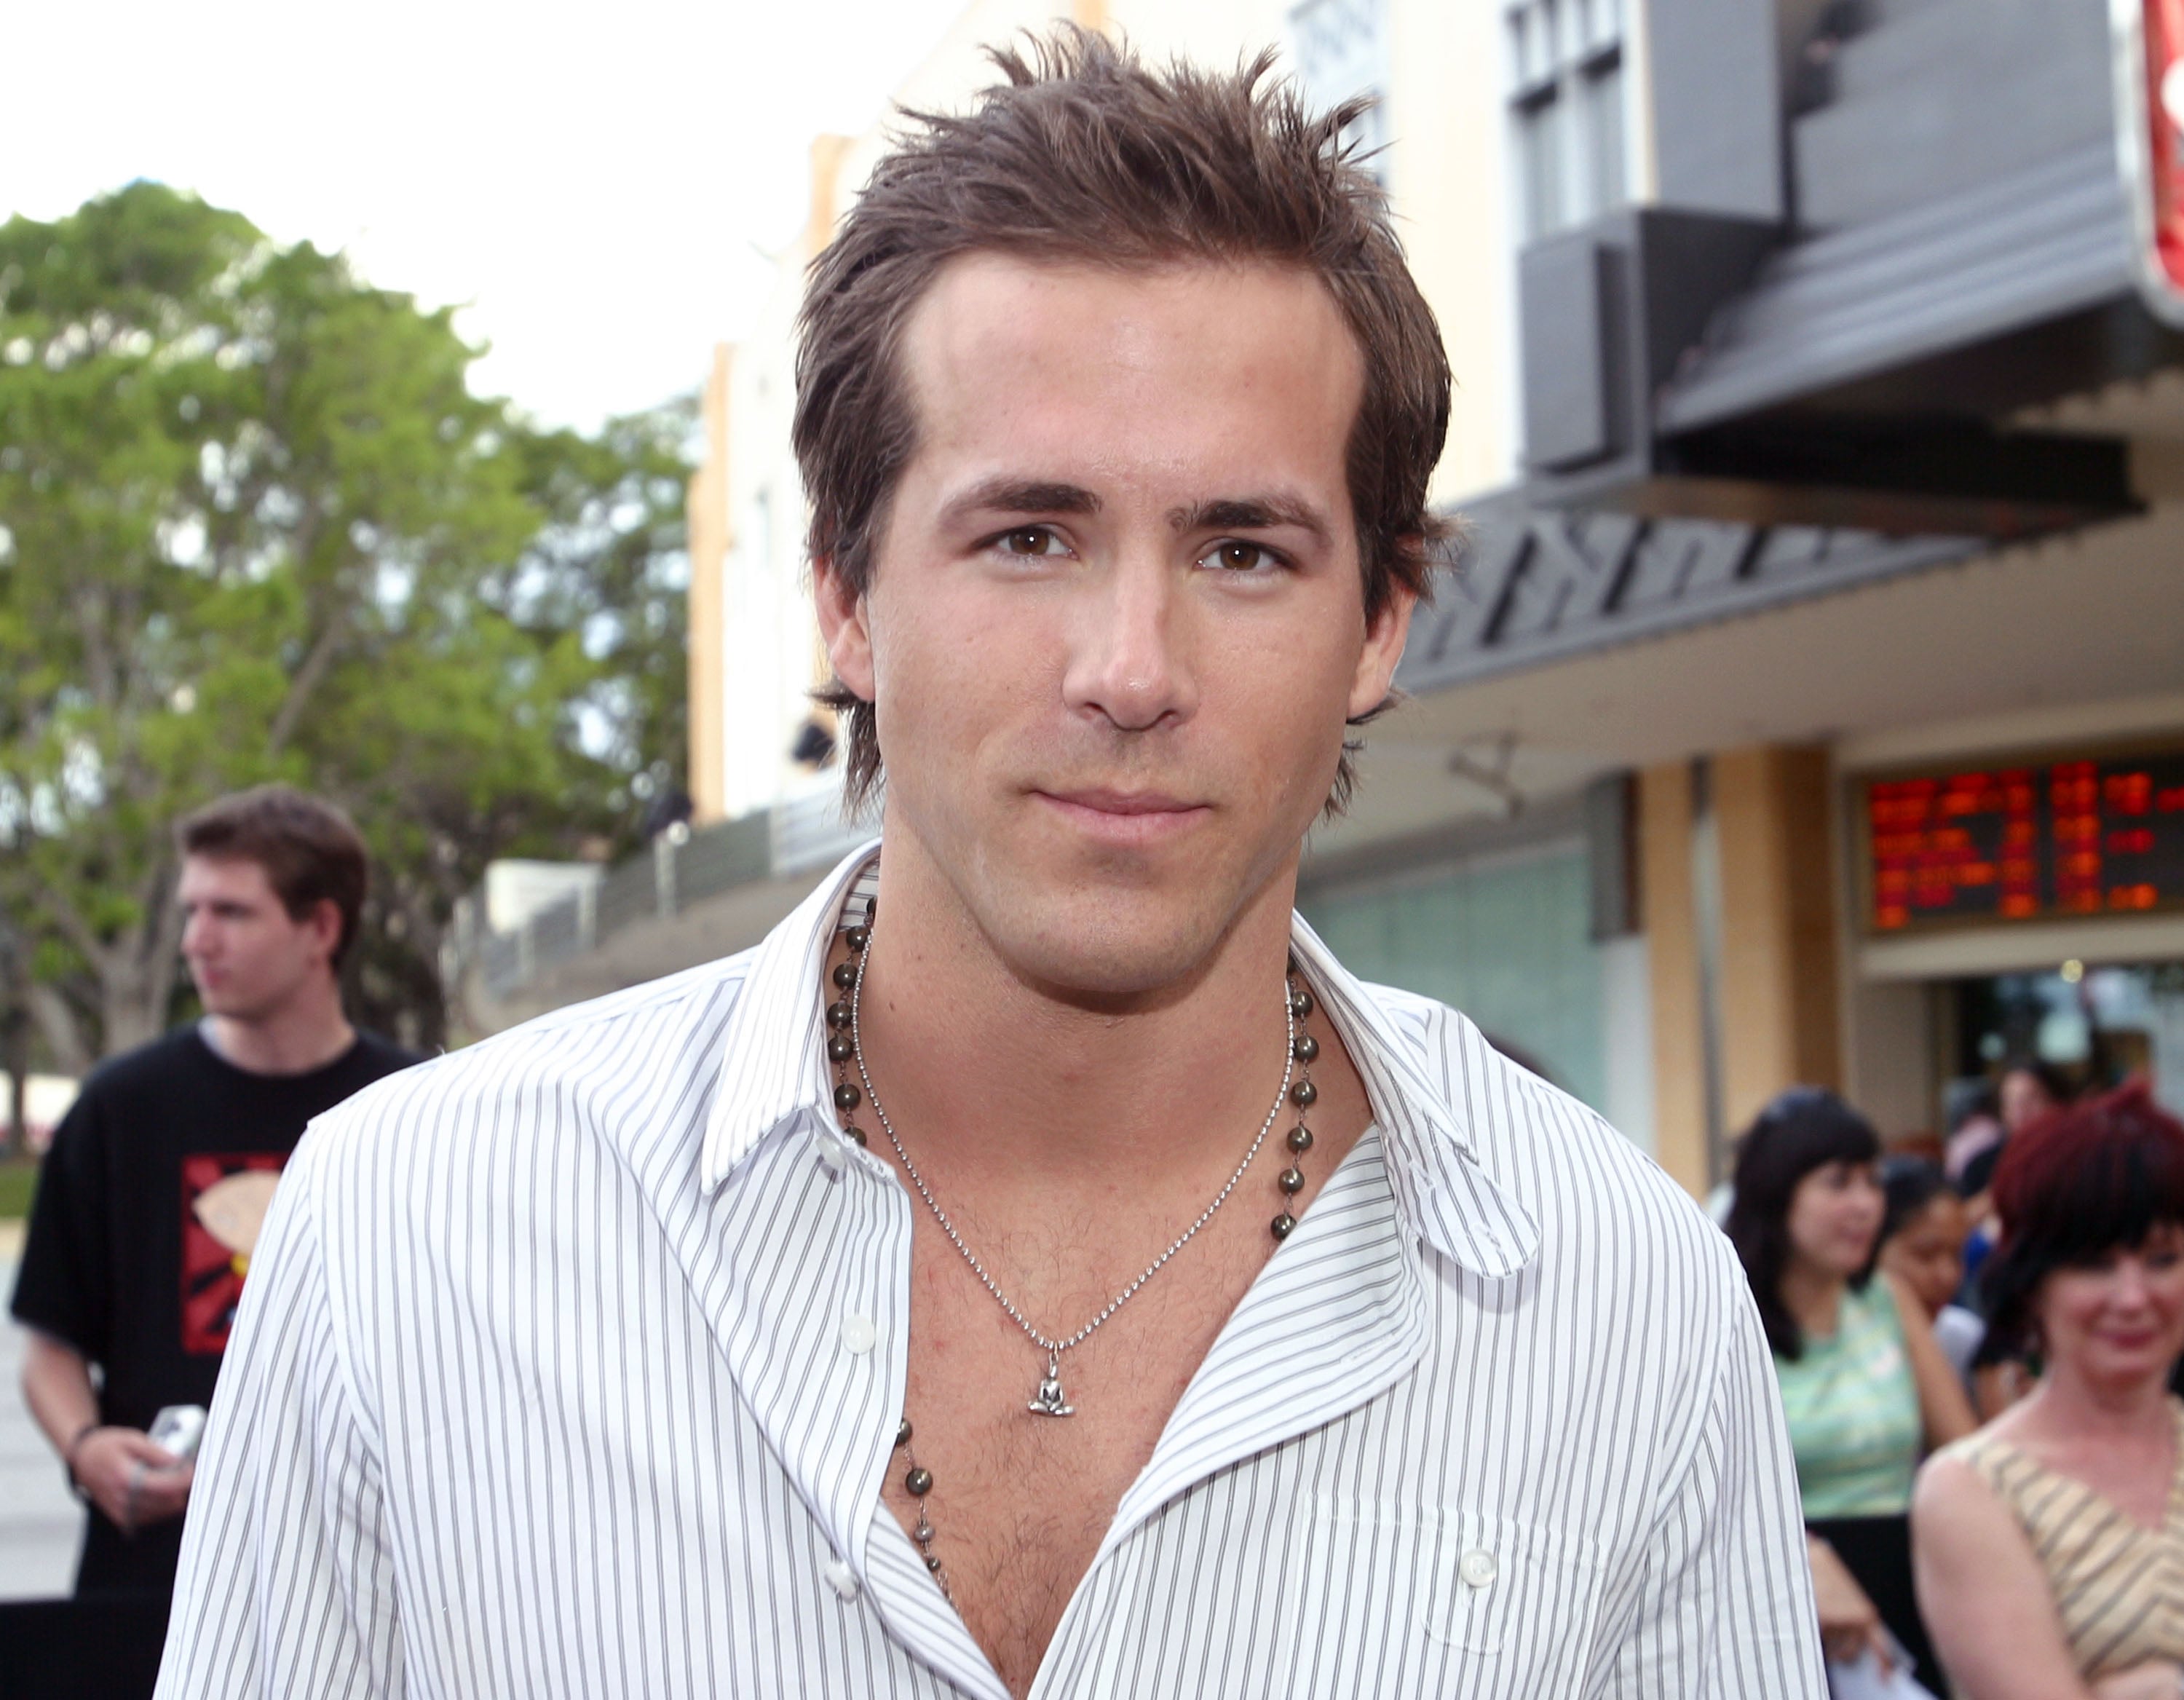 OPINION: Here are 9 reasons why Ryan Reynolds is the king of